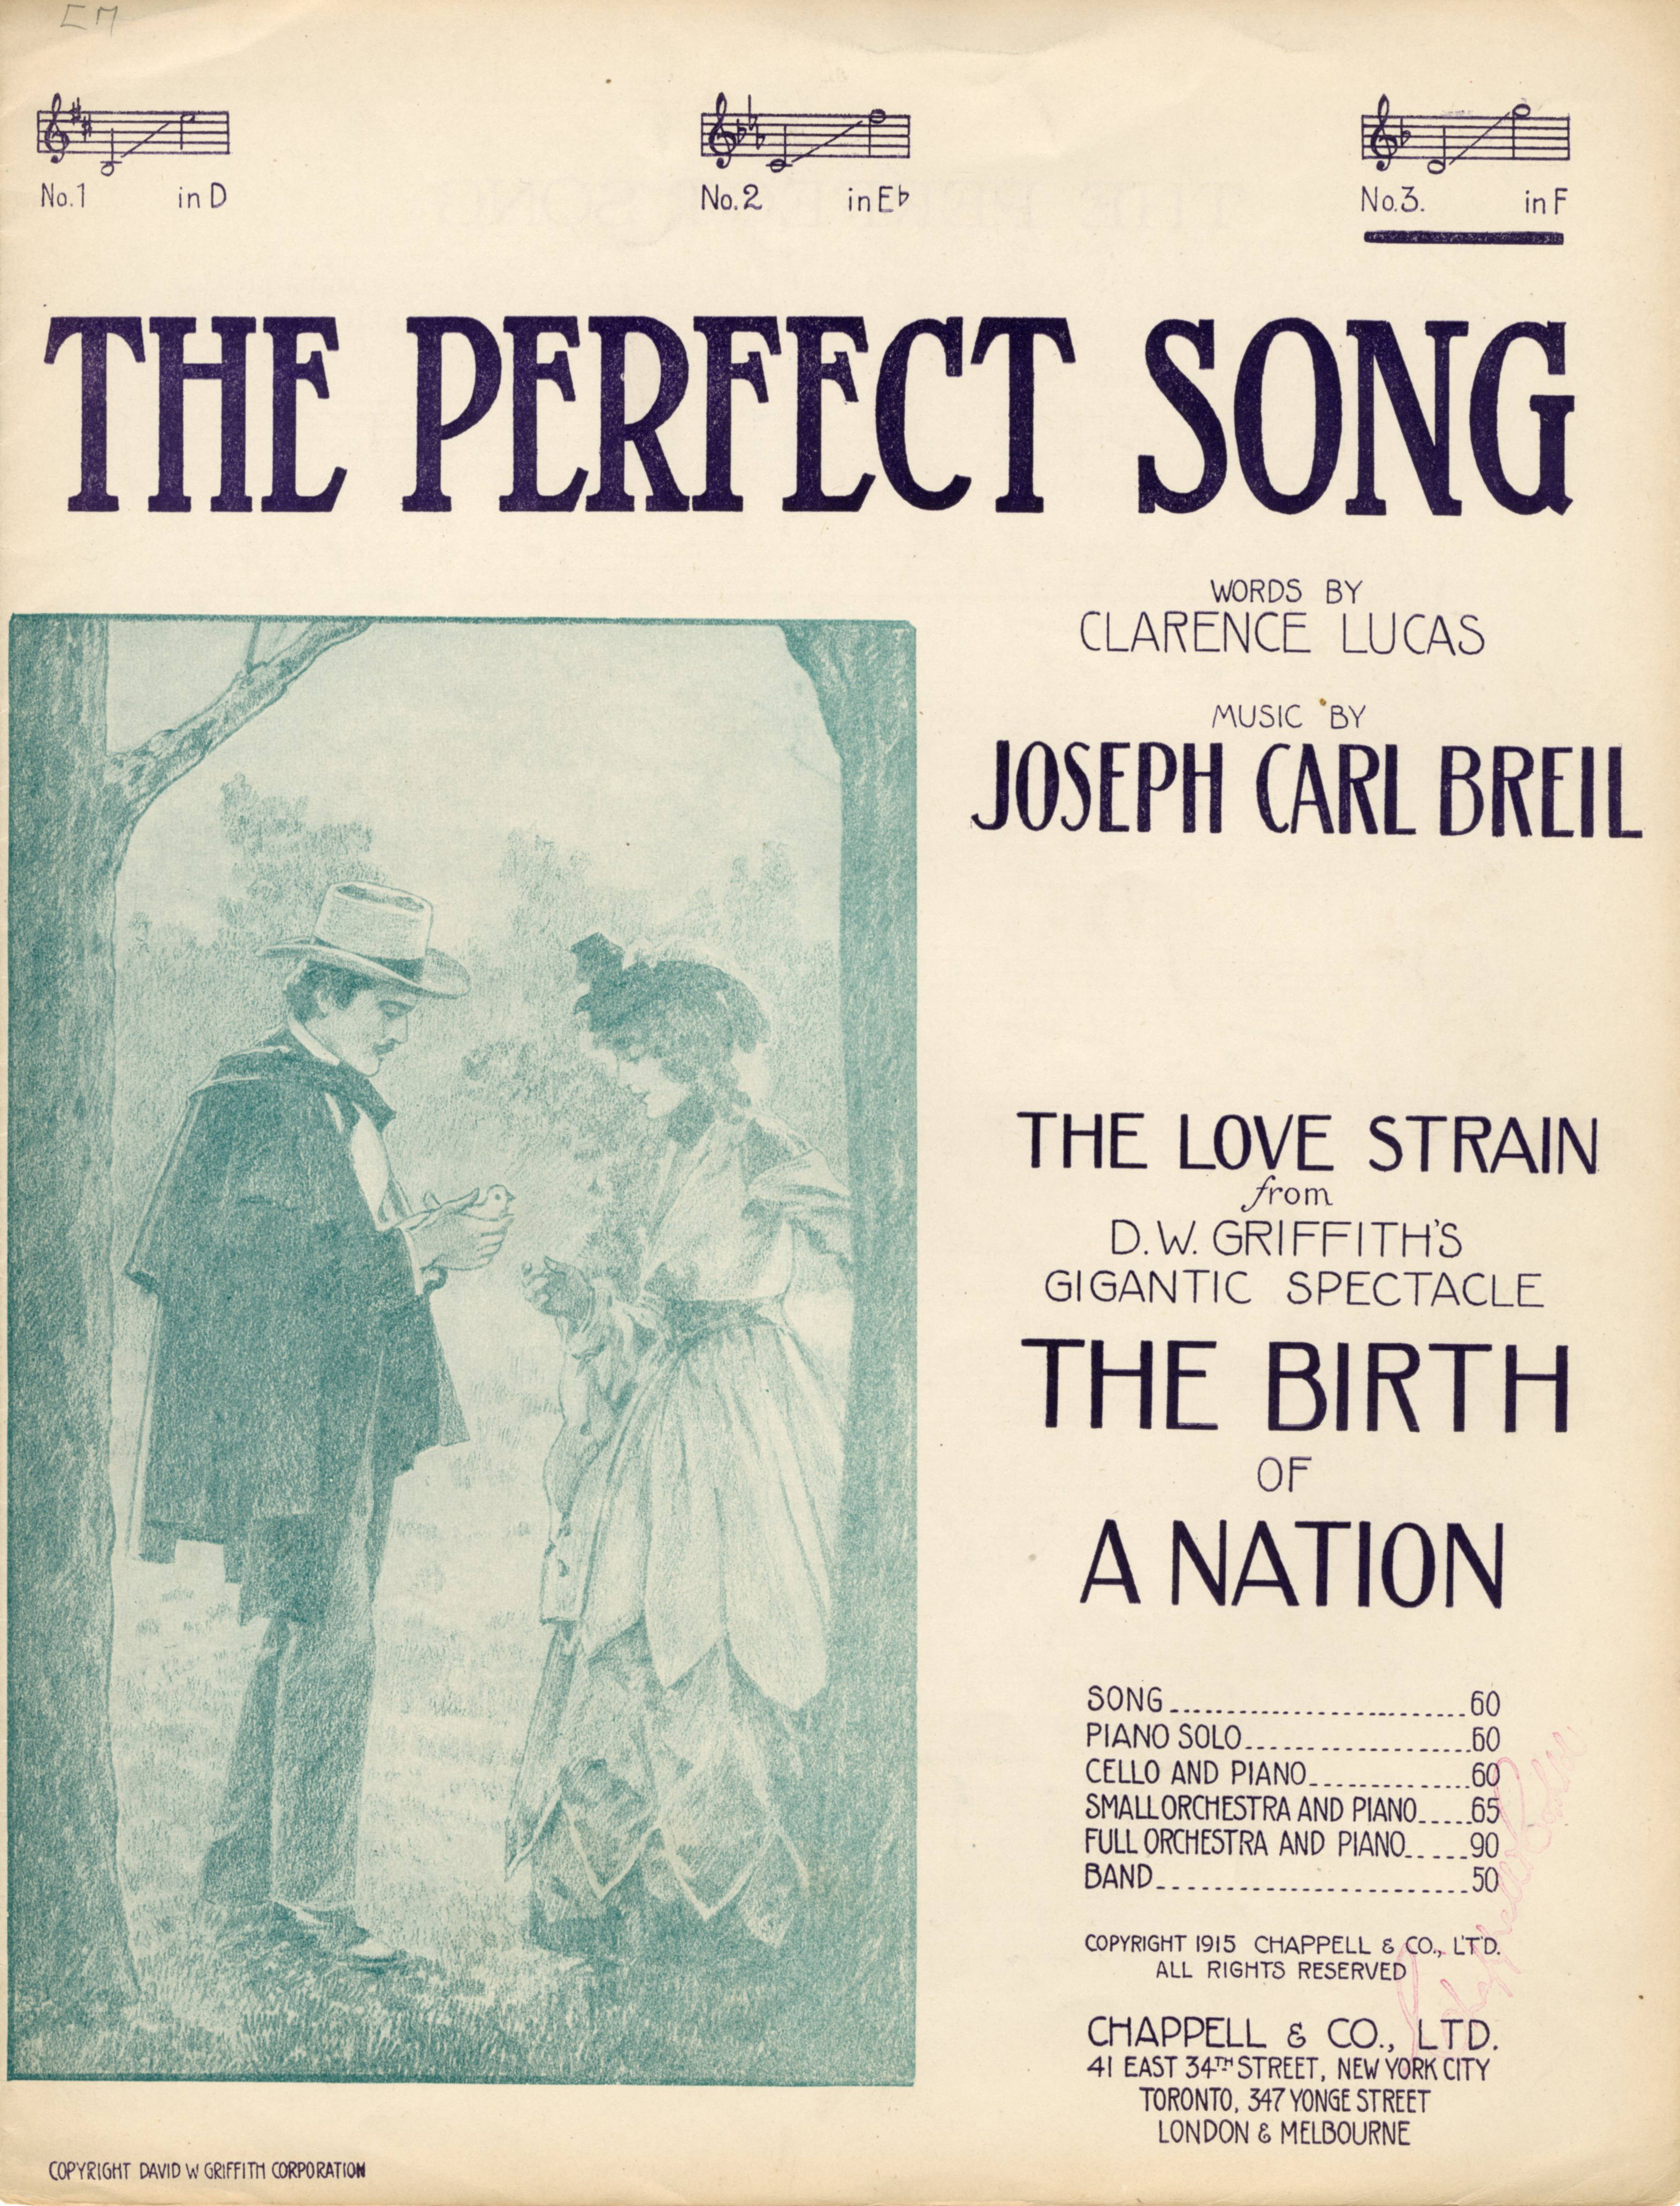 Sheet music cover - THE PERFECT SONG - THE LOVE STRAIN FROM D.W. GRIFFITH'S GIGANTIC SPECTACLE THE BIRTH OF A NATION (1915)